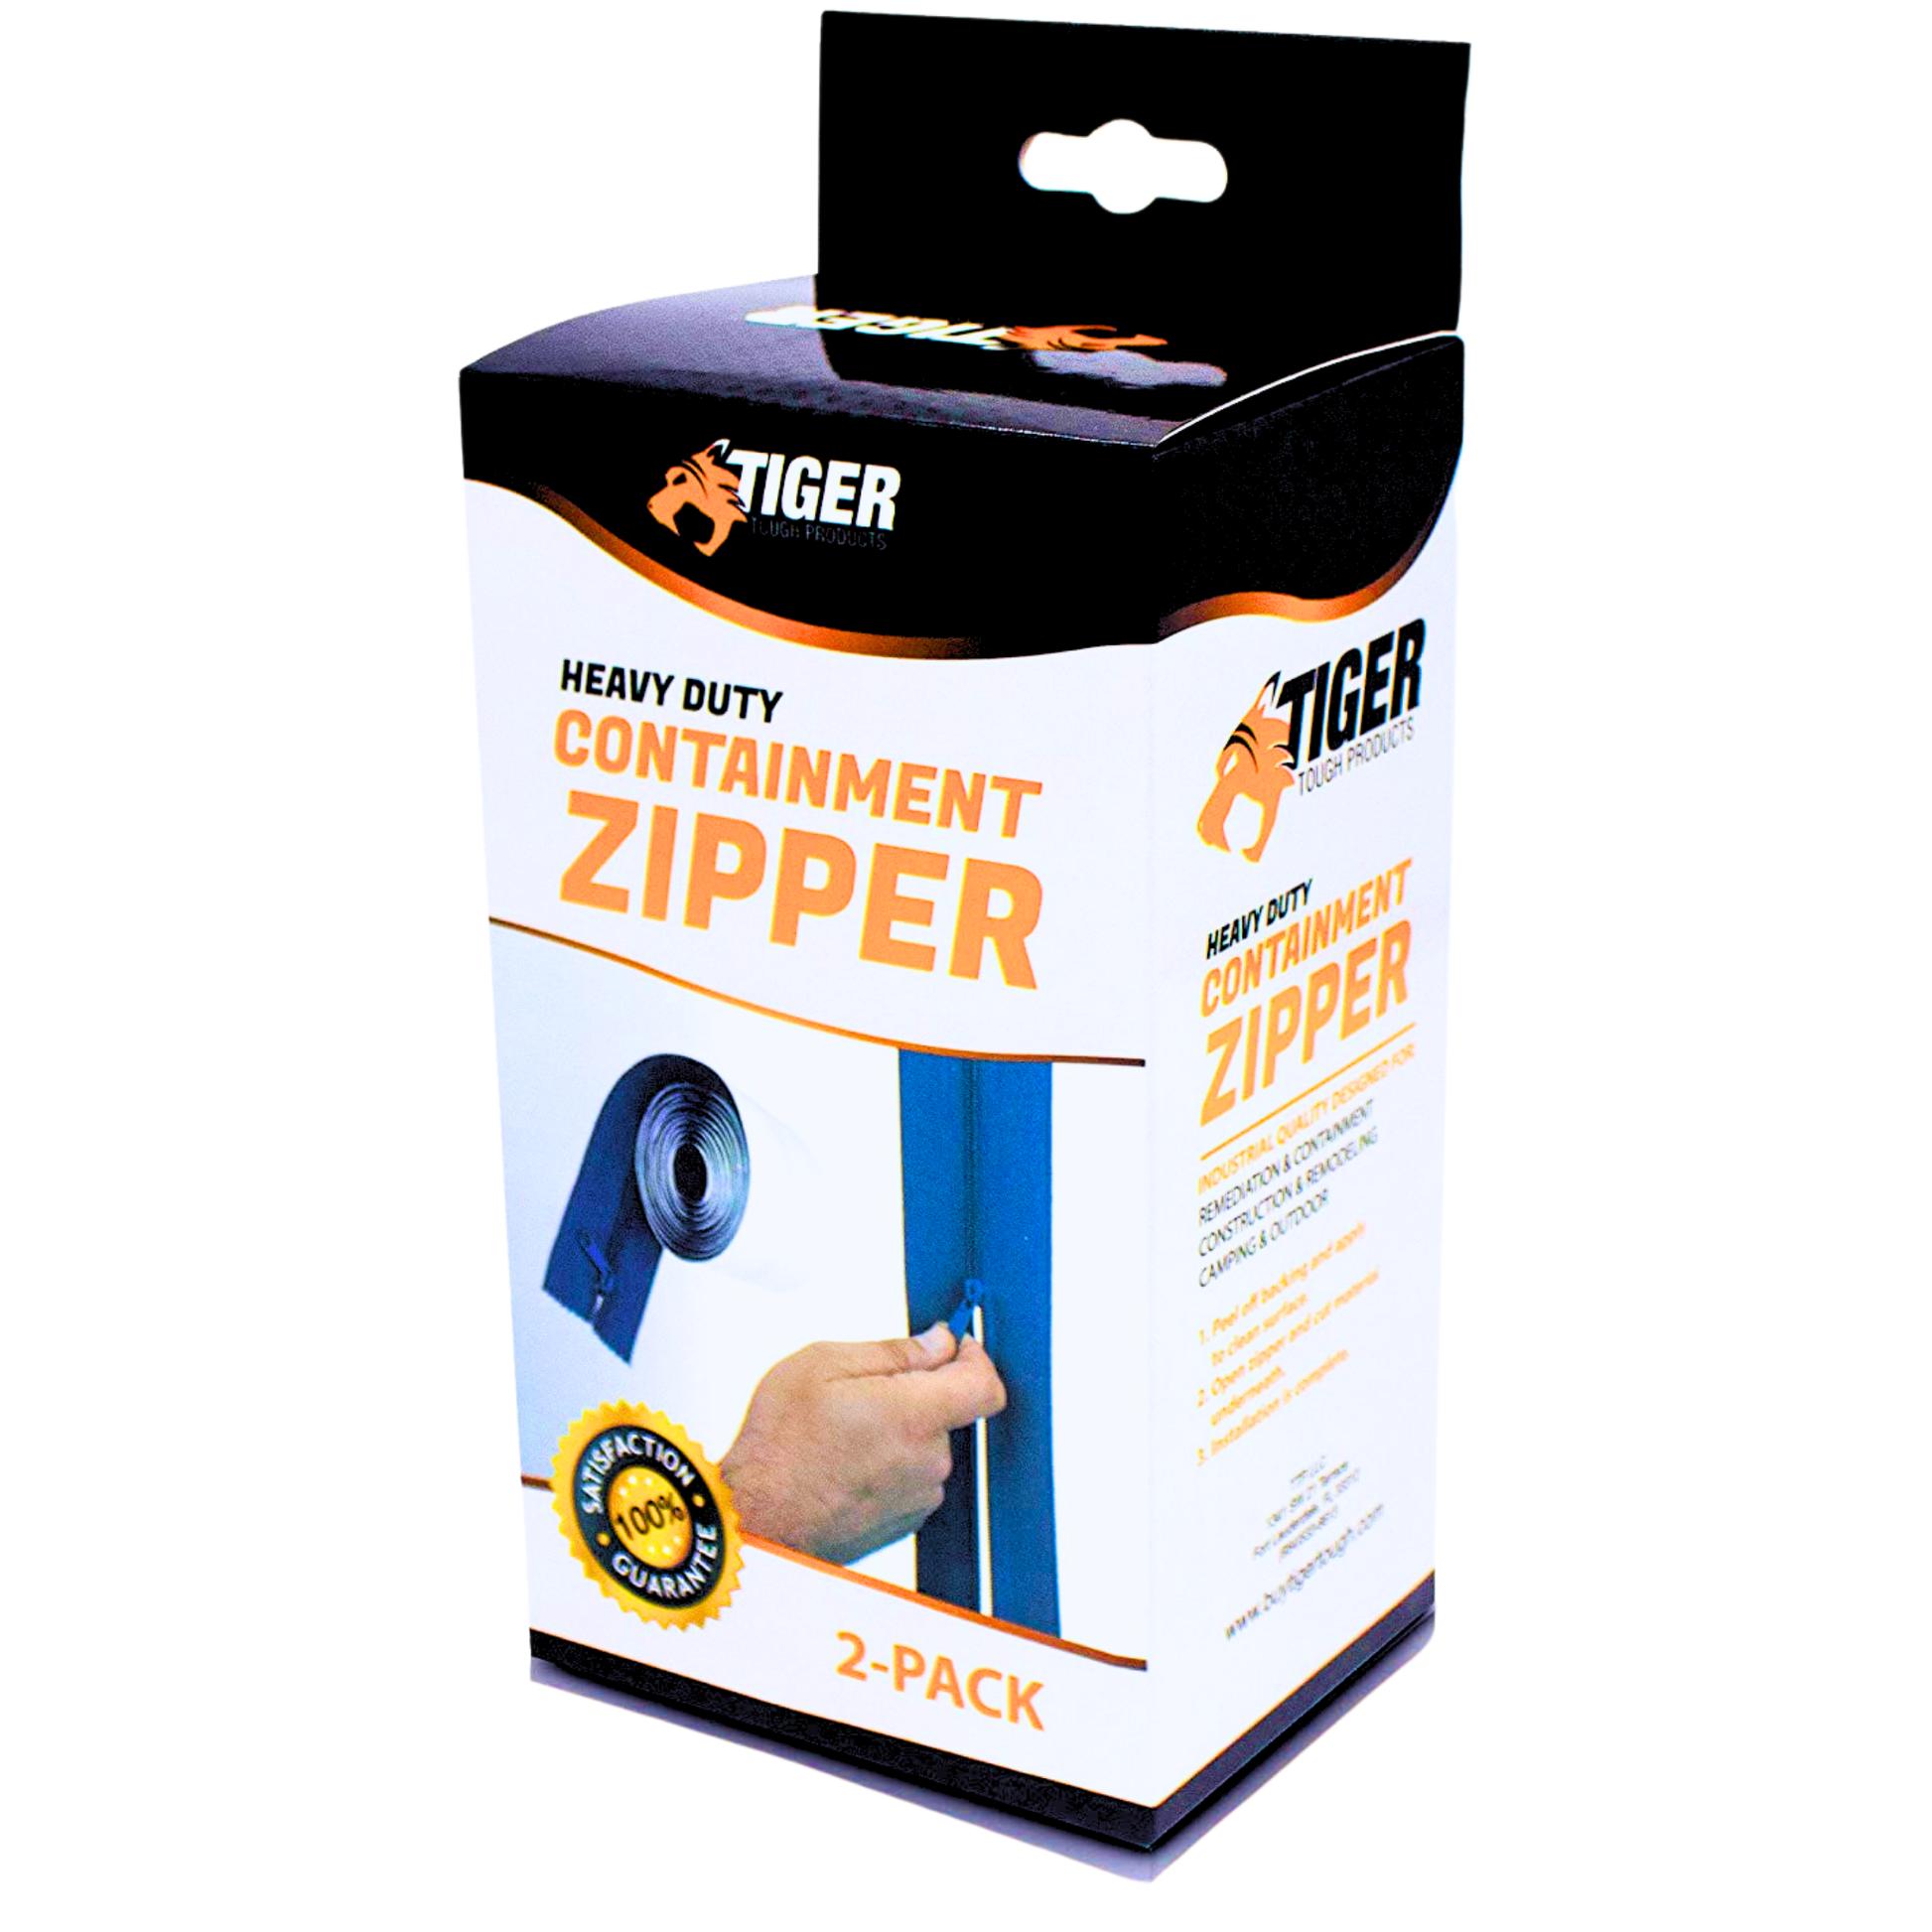 Heavy Duty Containment Zippers 12ct - Airtight Seal, Peel & Stick